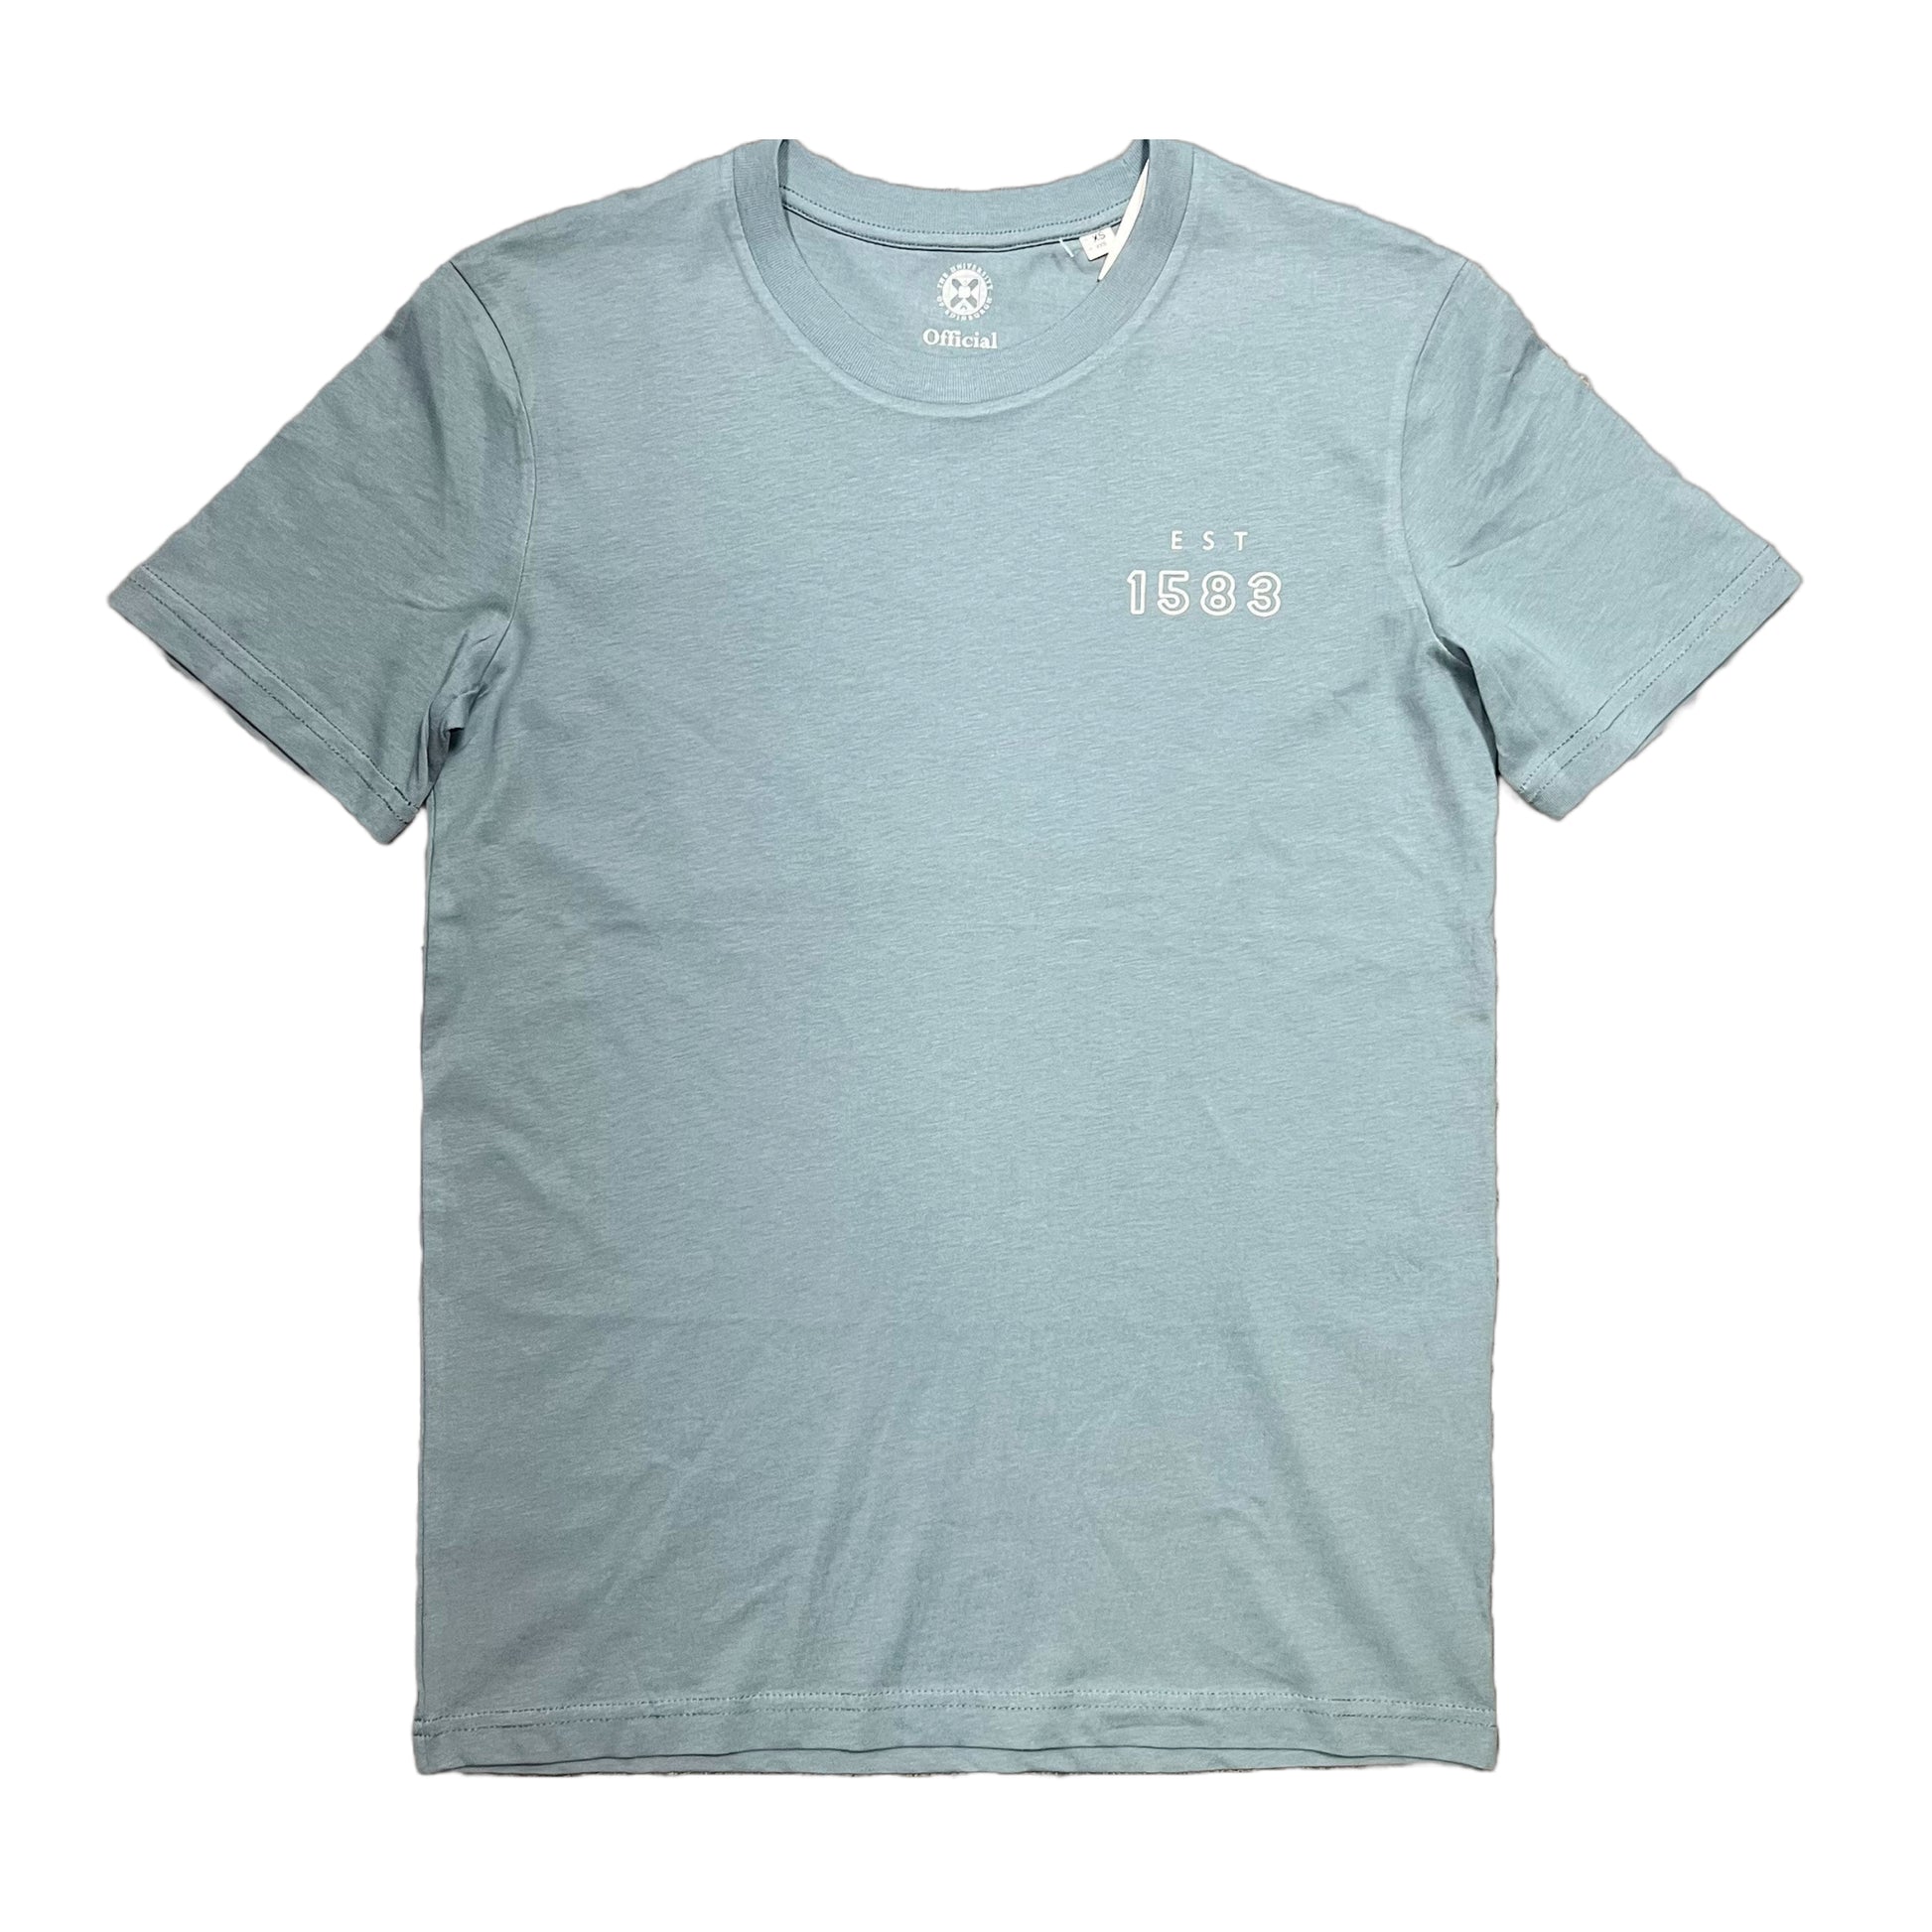 McEwan Hall Coordinates T-Shirt in Blue. Image showing front design with text 'EST 1583'.